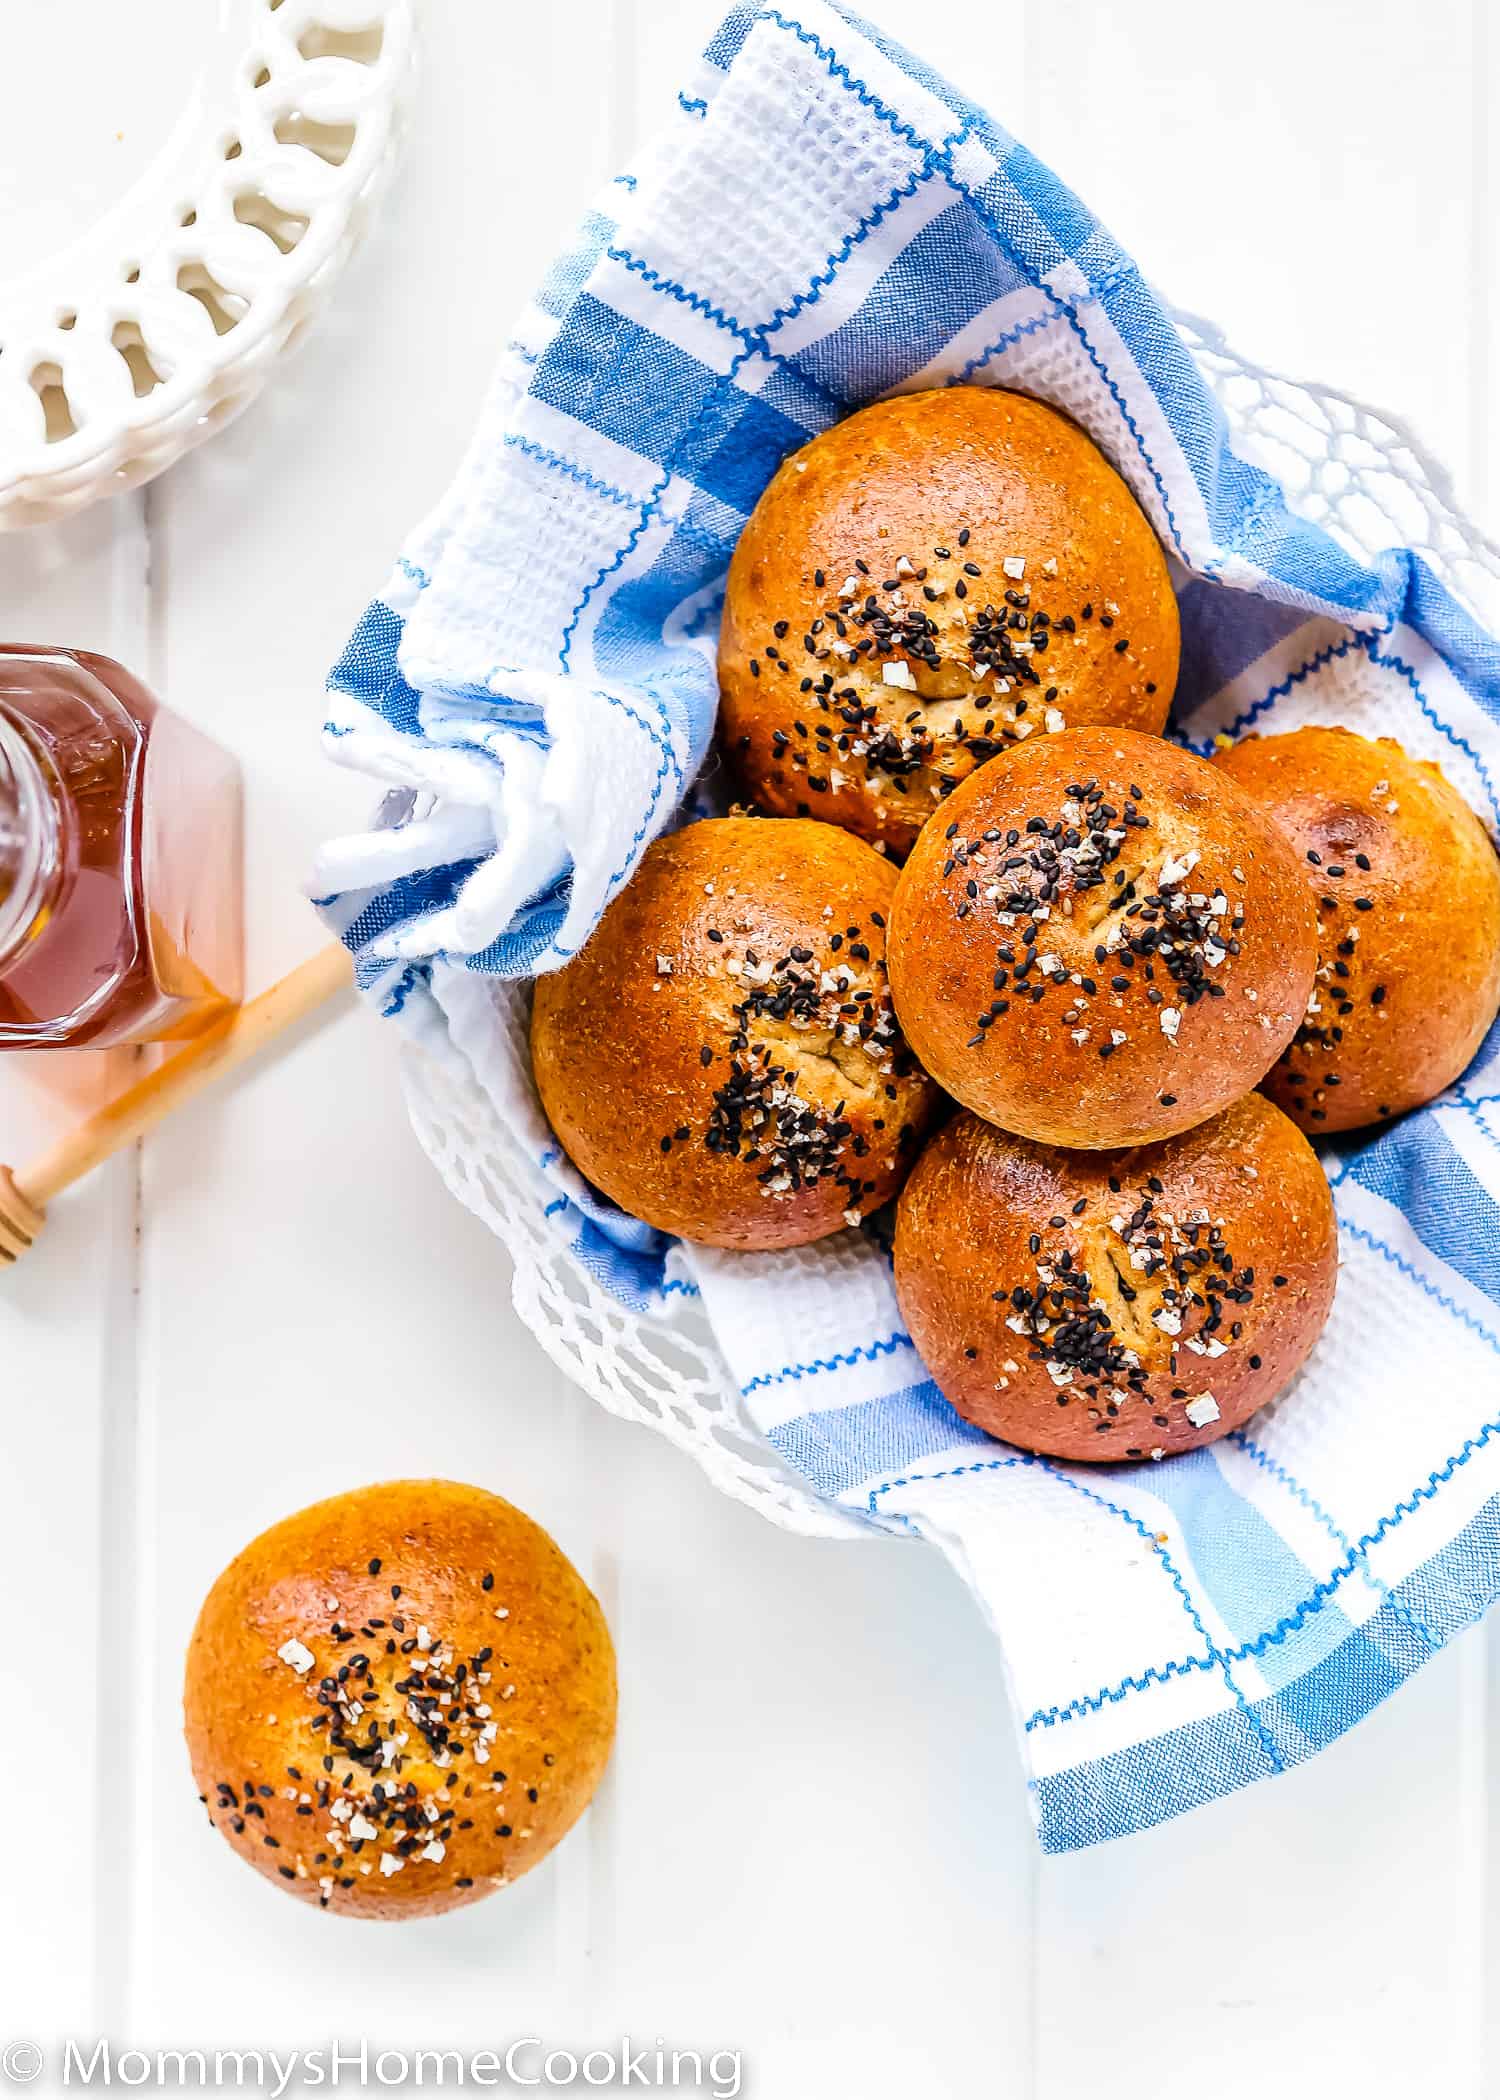 Eggless Honey Whole Wheat Rolls with sesame seeds and pretzel salt in a bread basket with a blue kitchen towel and a bottle of honey on the side.